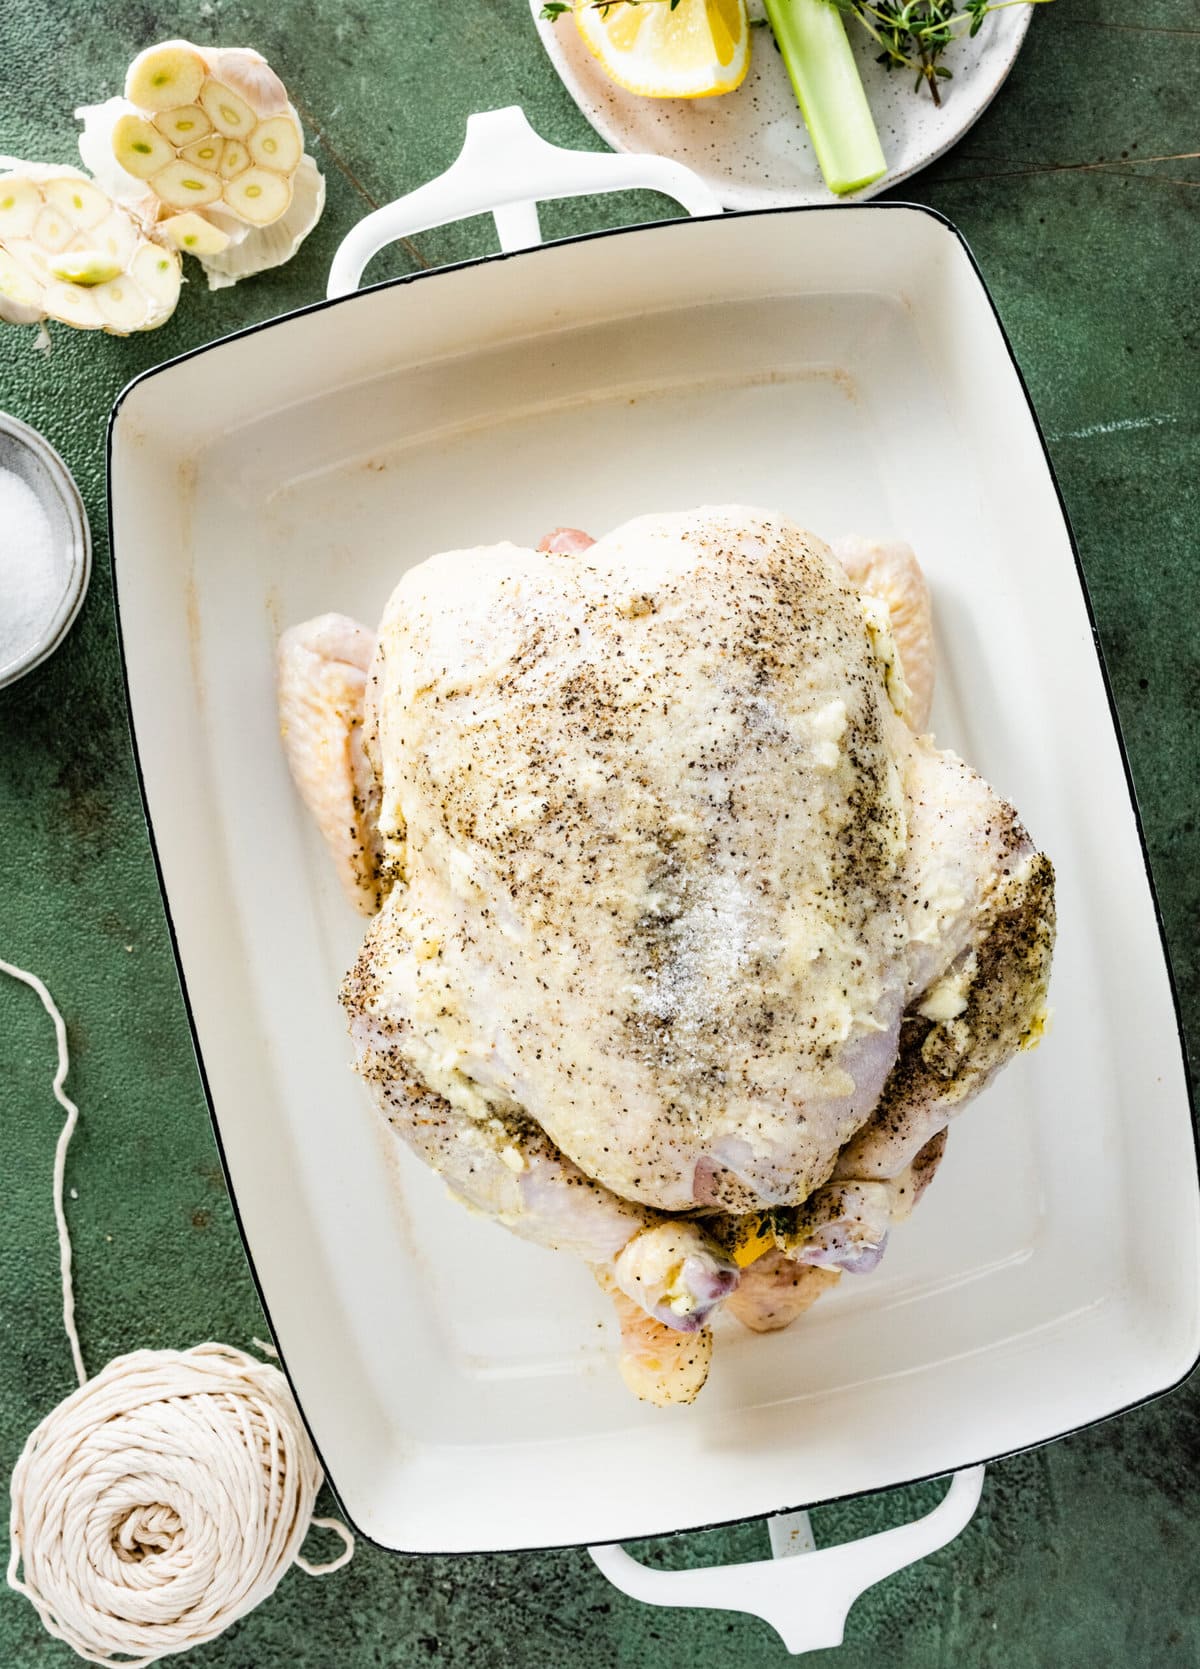 How Long to Cook Whole Chicken Recipe Perfect & Juicy (step-by-step instructions)- placing the chicken in baking dish ready to bake.